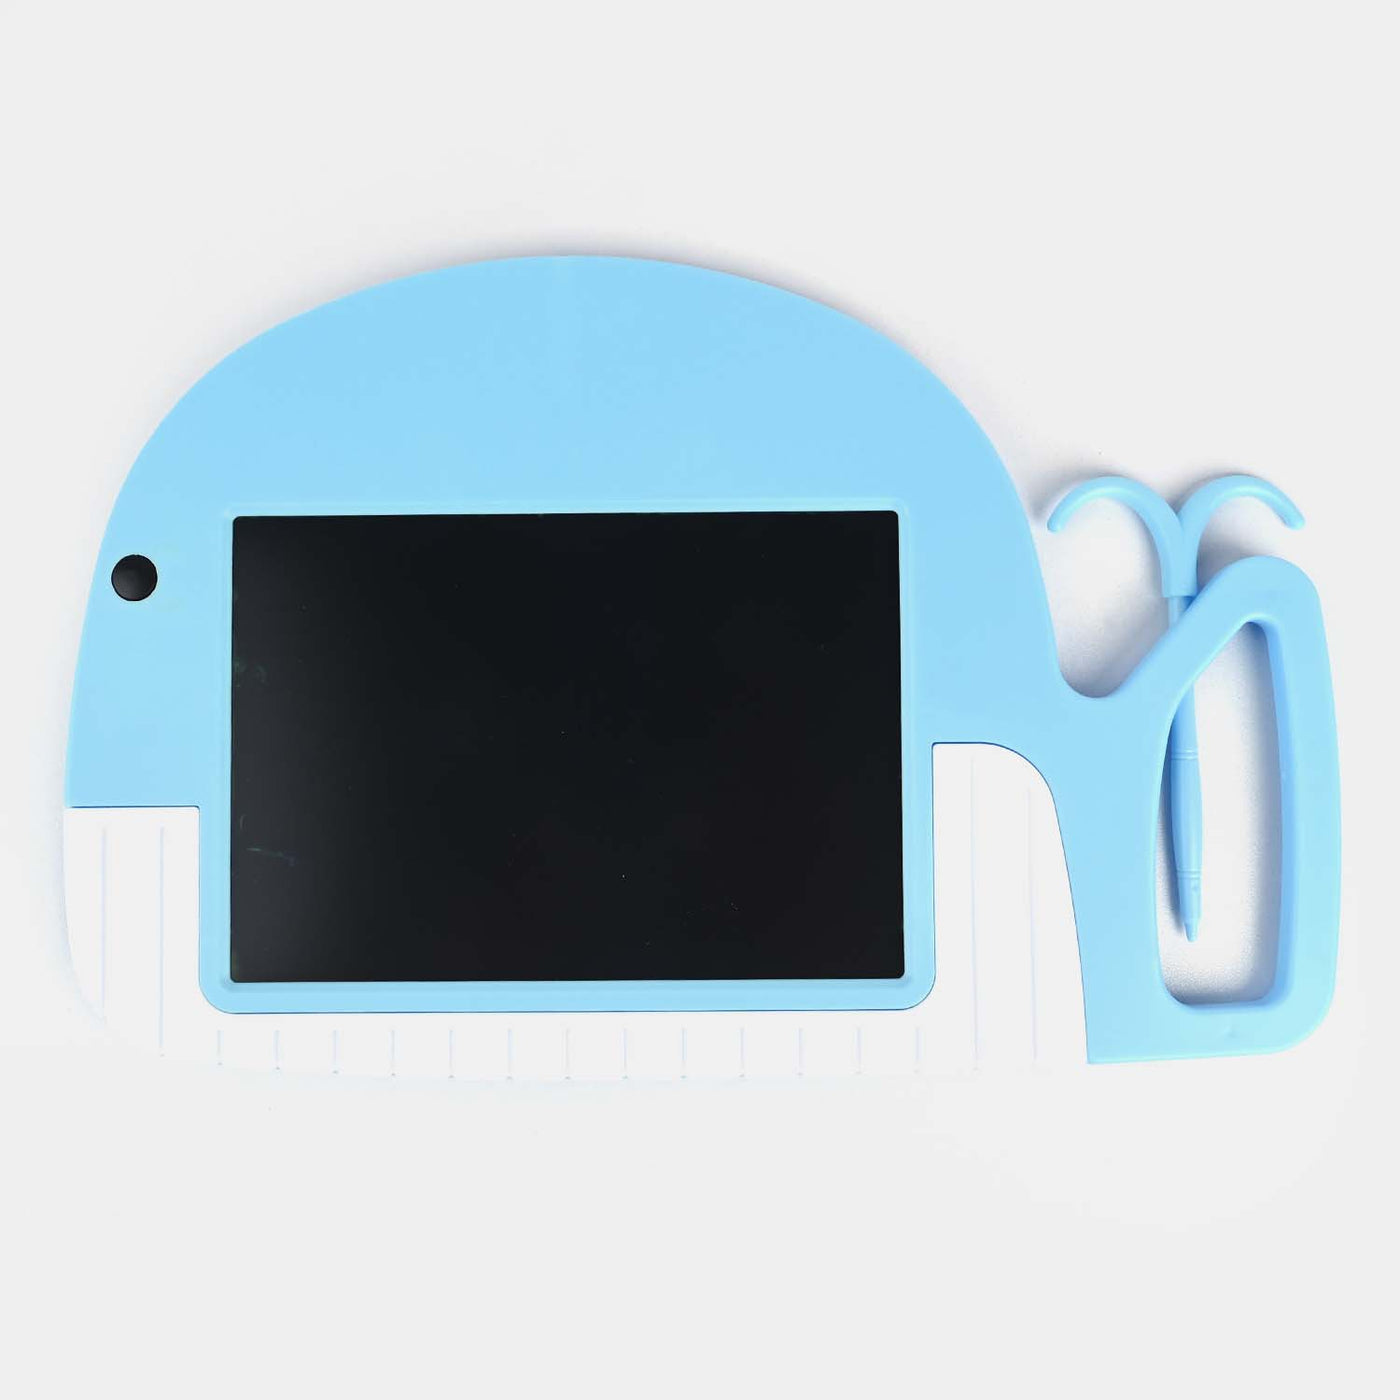 Fish Style LCD Writing Tablet 9 Inch